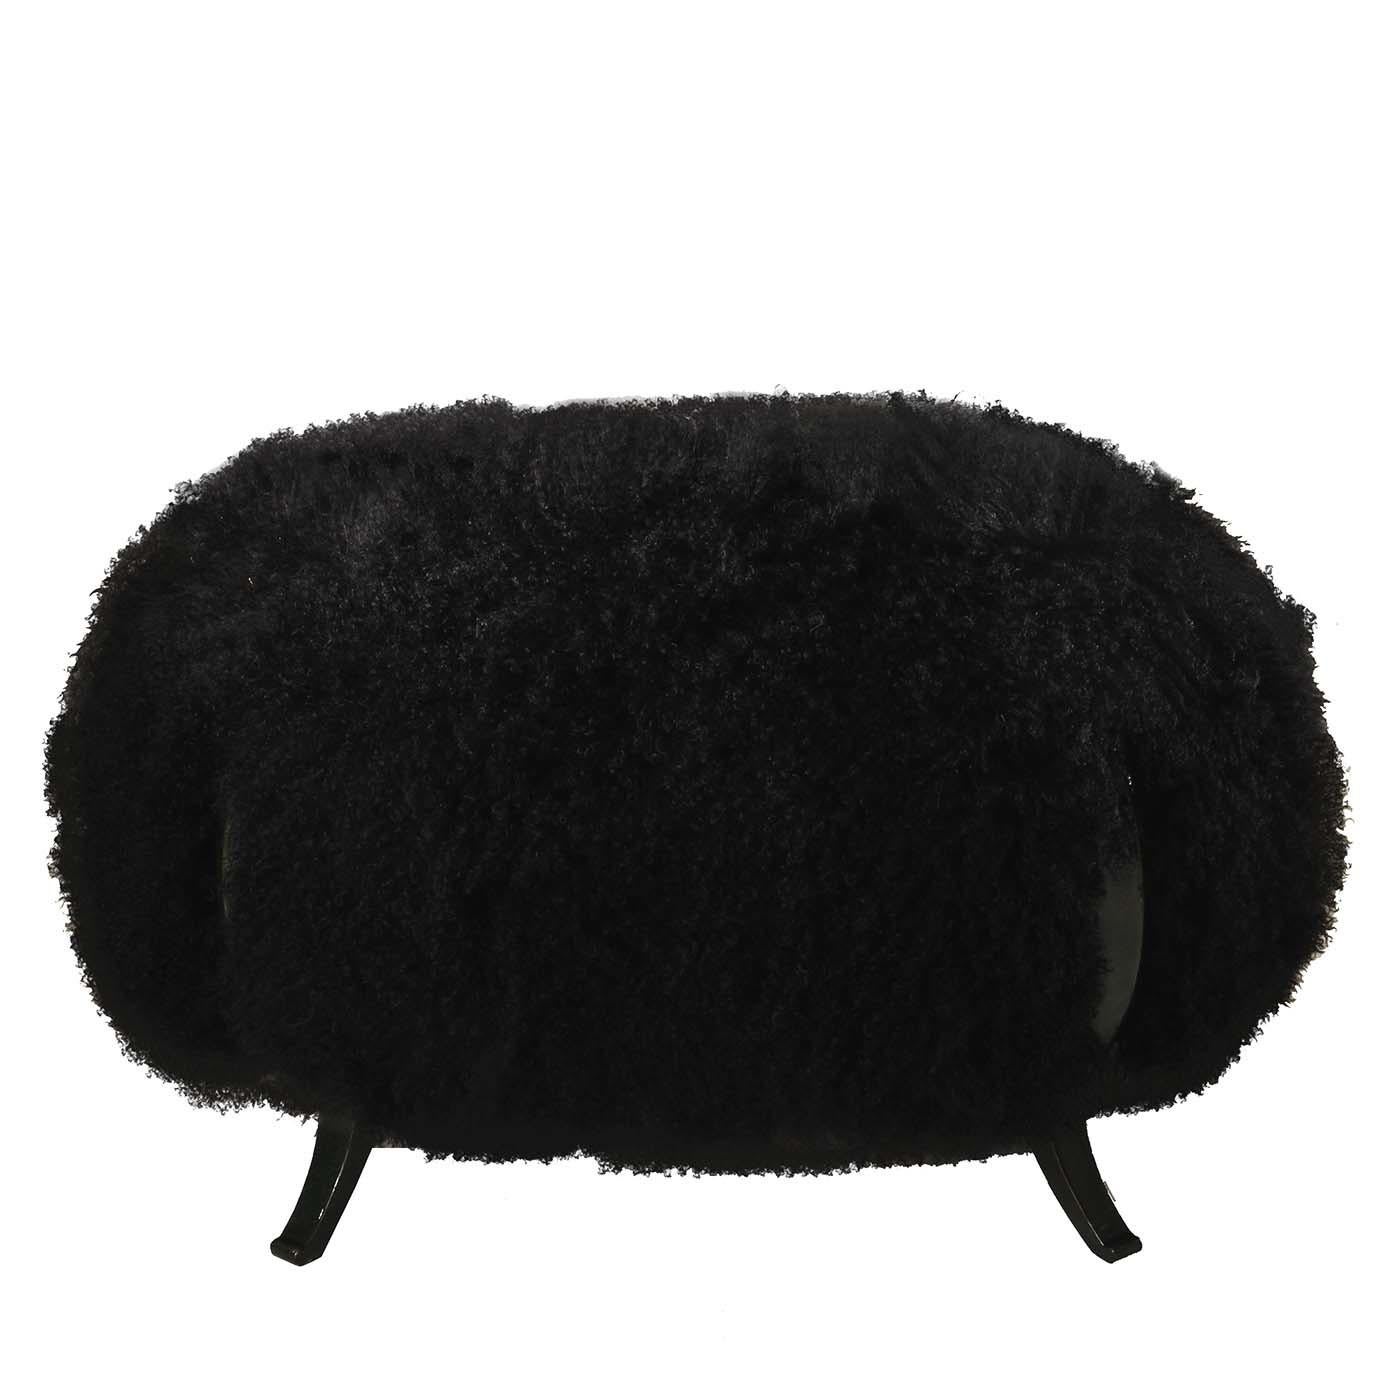 Part of a series of poufs that are strikingly unique and elegant object of functional decor, this pouf is a superb addition to a modern or rustic home. It can double as a bench to add extra seats to any room in the house or be a comfortable footrest